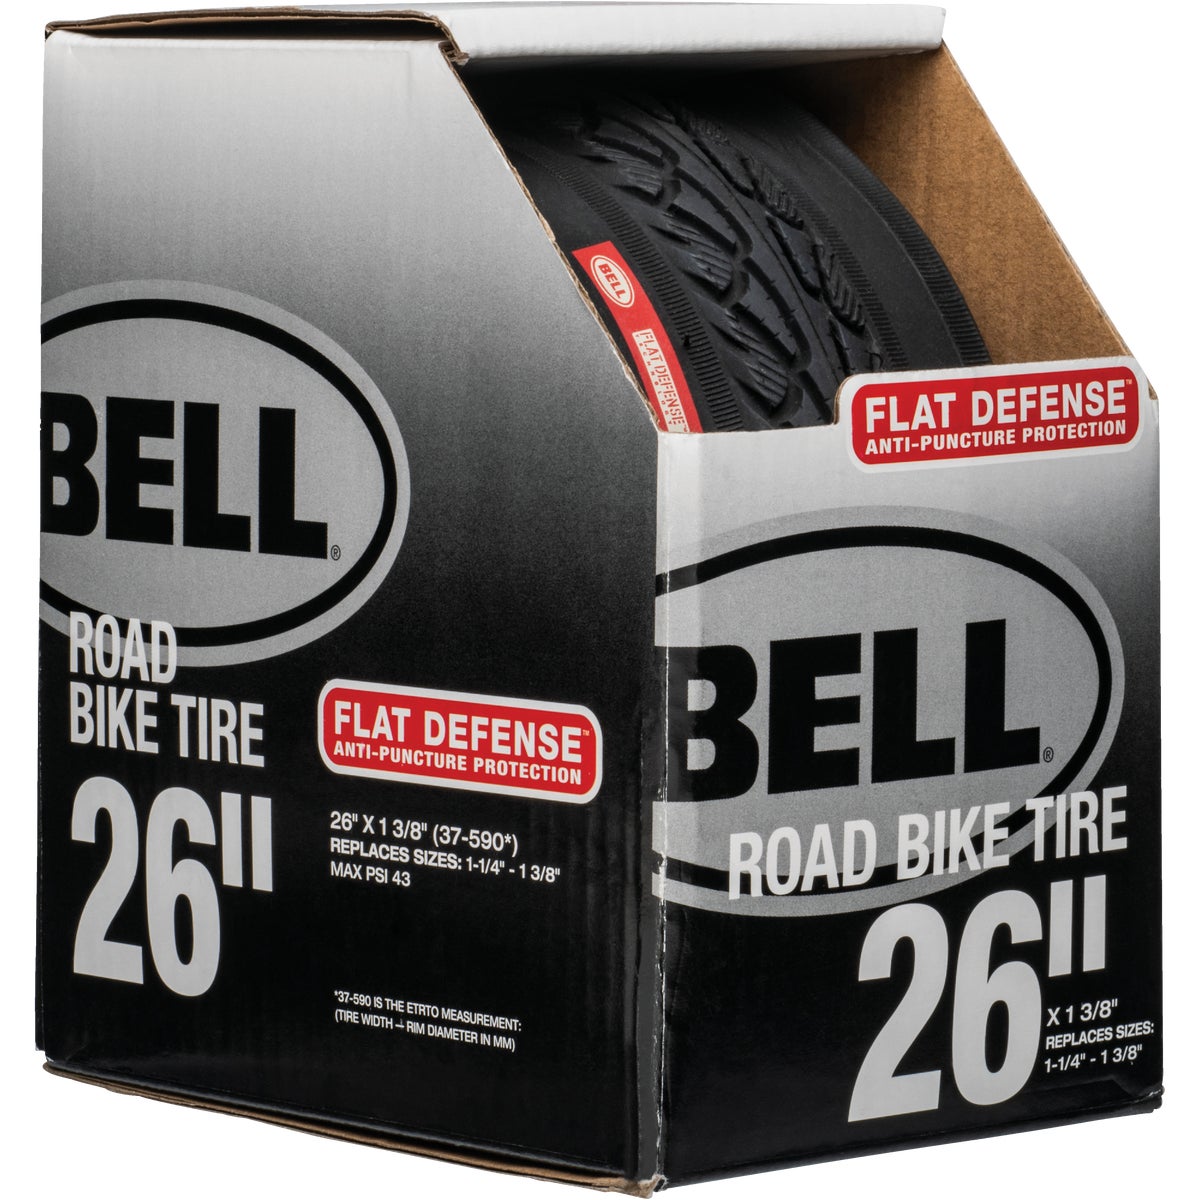 Item 812311, Road tire with Flat Defense.